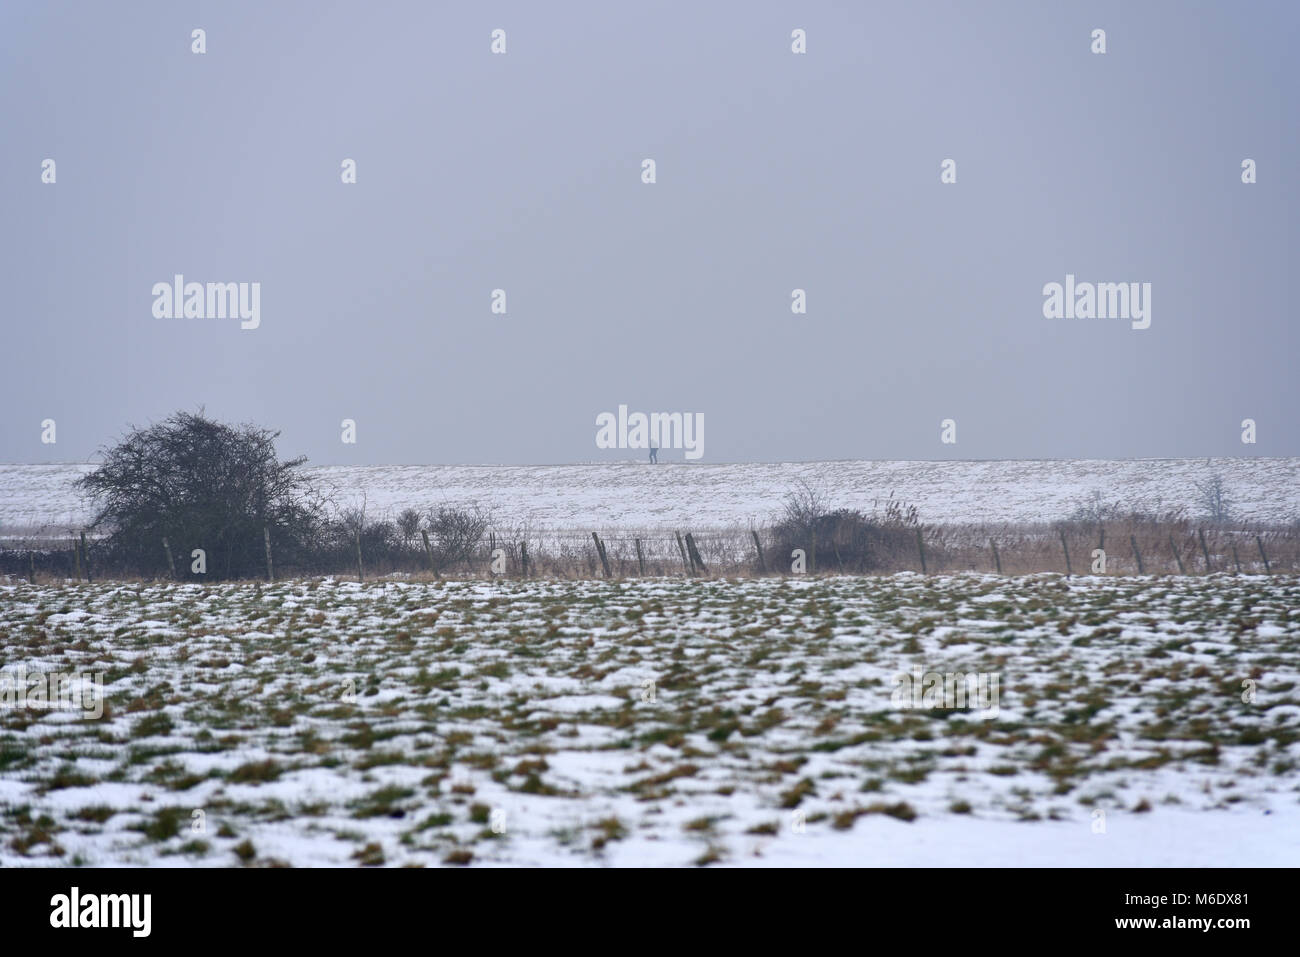 Lone person in Hadleigh Marsh country park and public footpath in Essex with snow on the ground from the beast from the east weather phenomenon Stock Photo